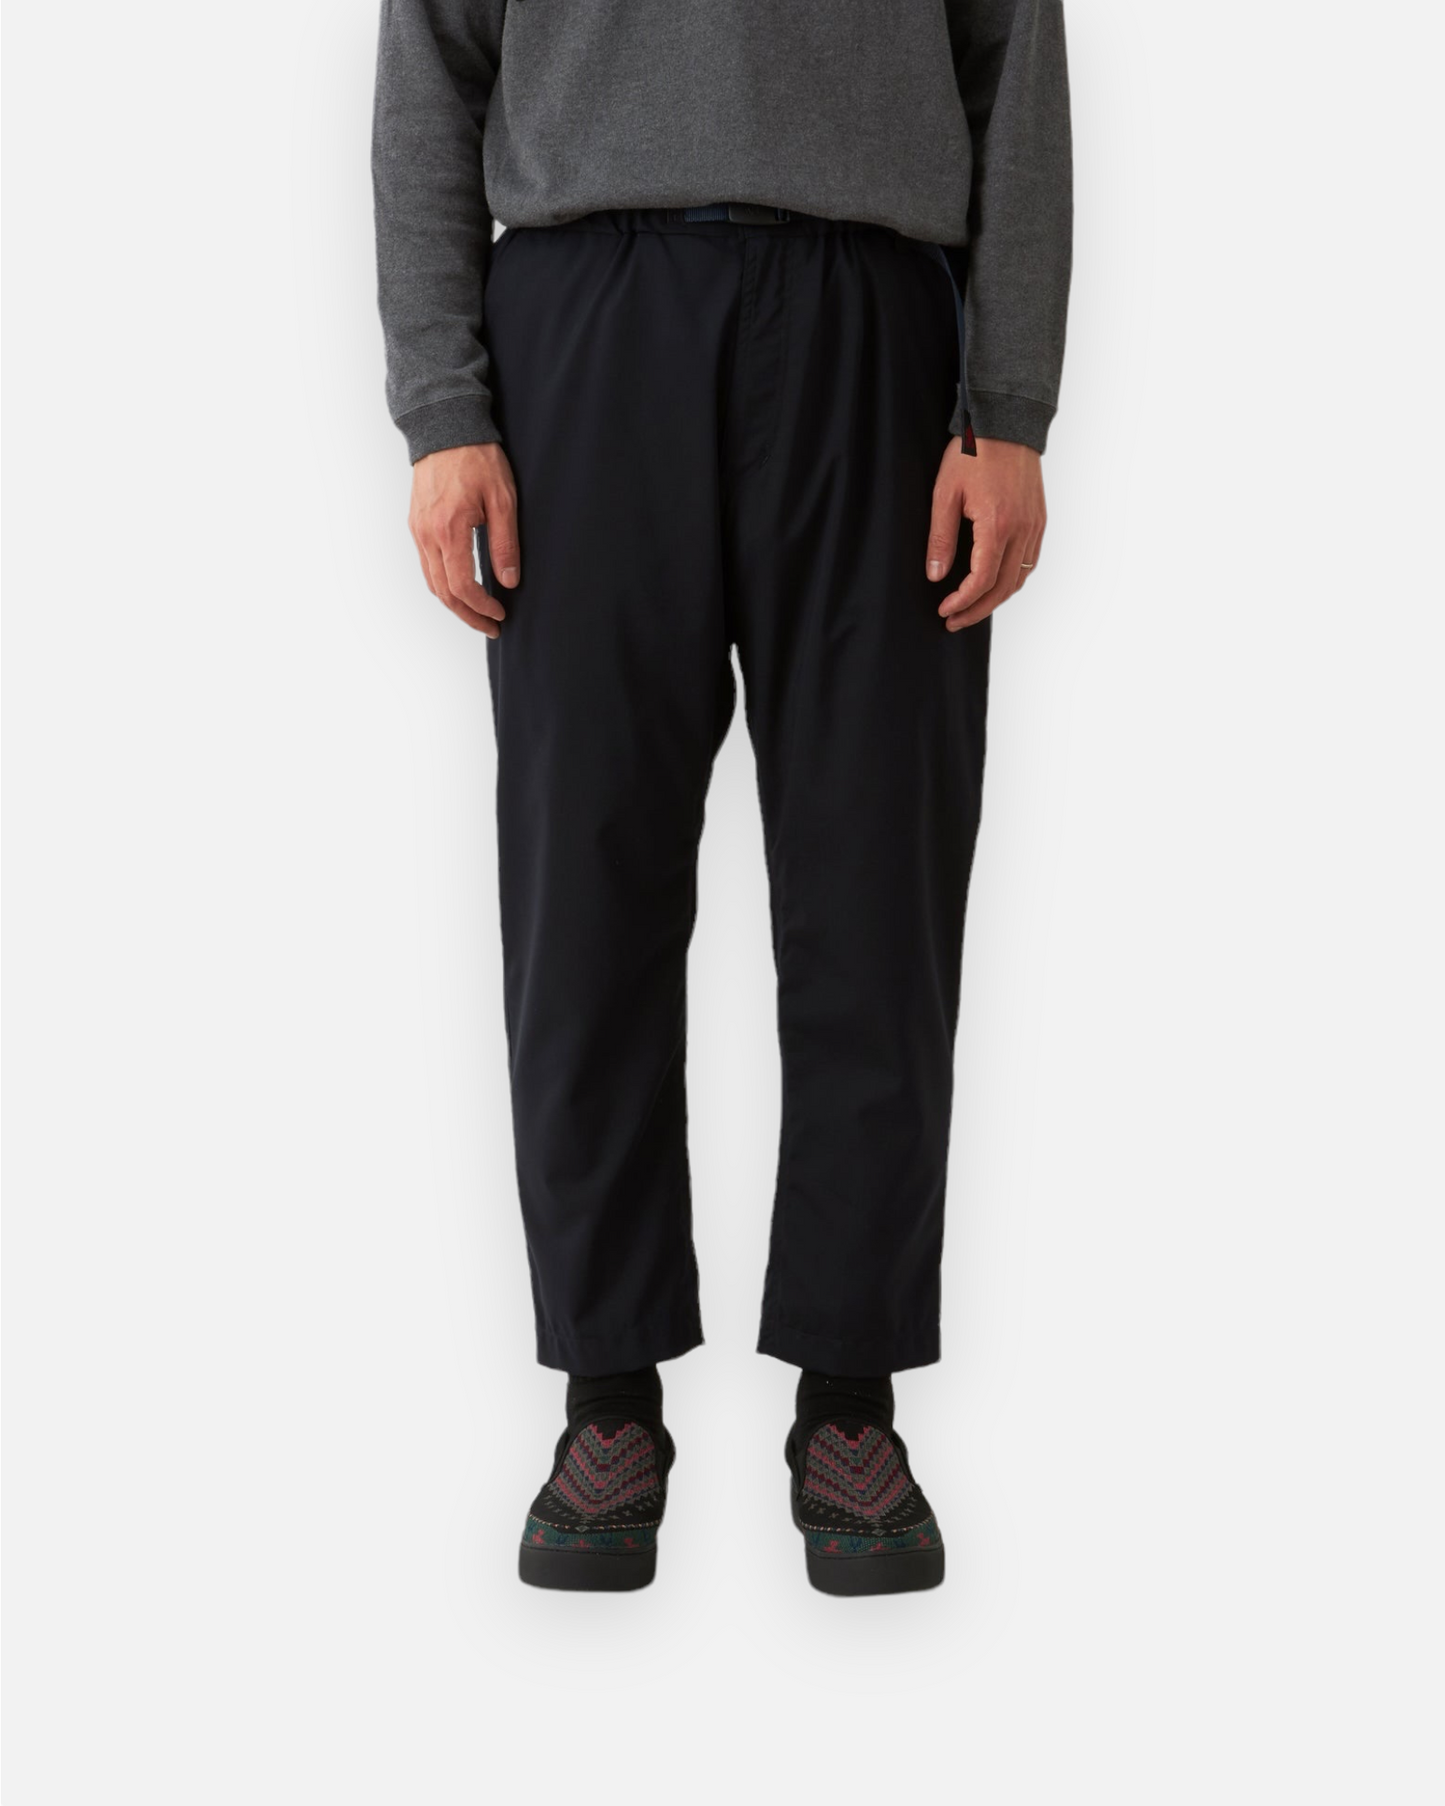 WHITE MOUNTAINEERING x GRAMICCI TECH WOOLLY TAPERED PANTS (NAVY)